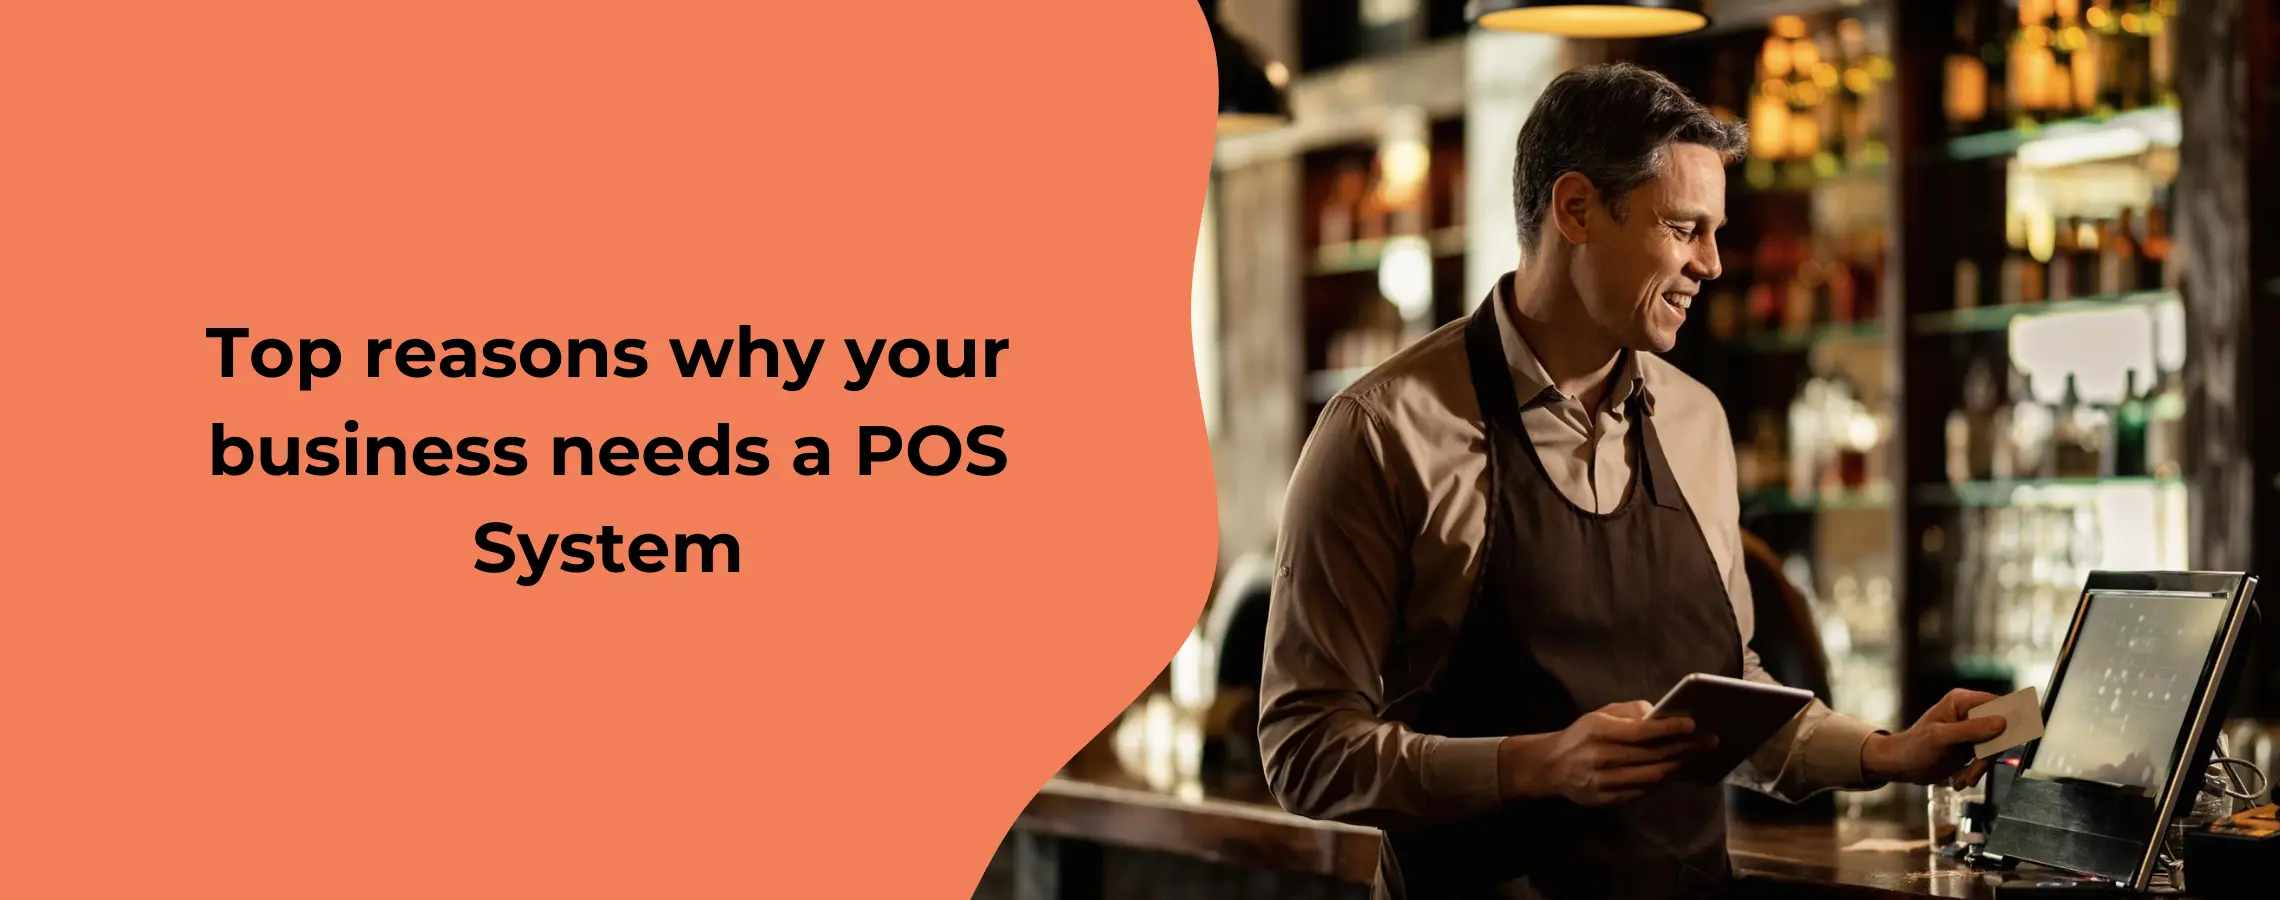 Top reasons why your business needs a POS System